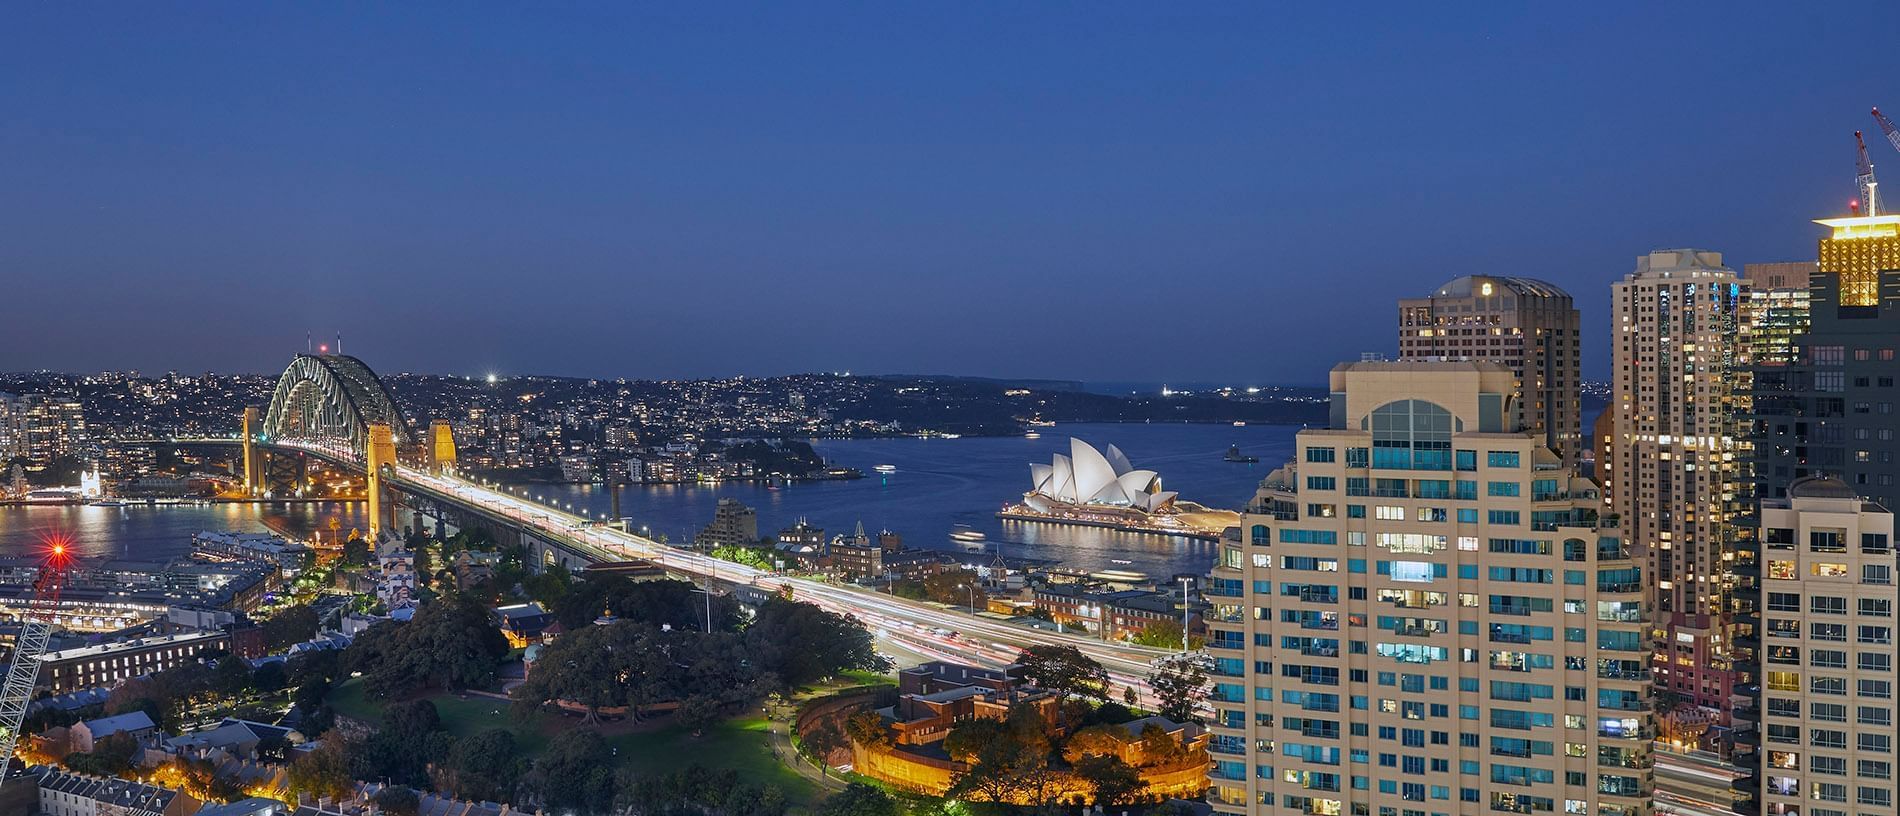 Distance night view of the city at Crown Hotel Sydney
